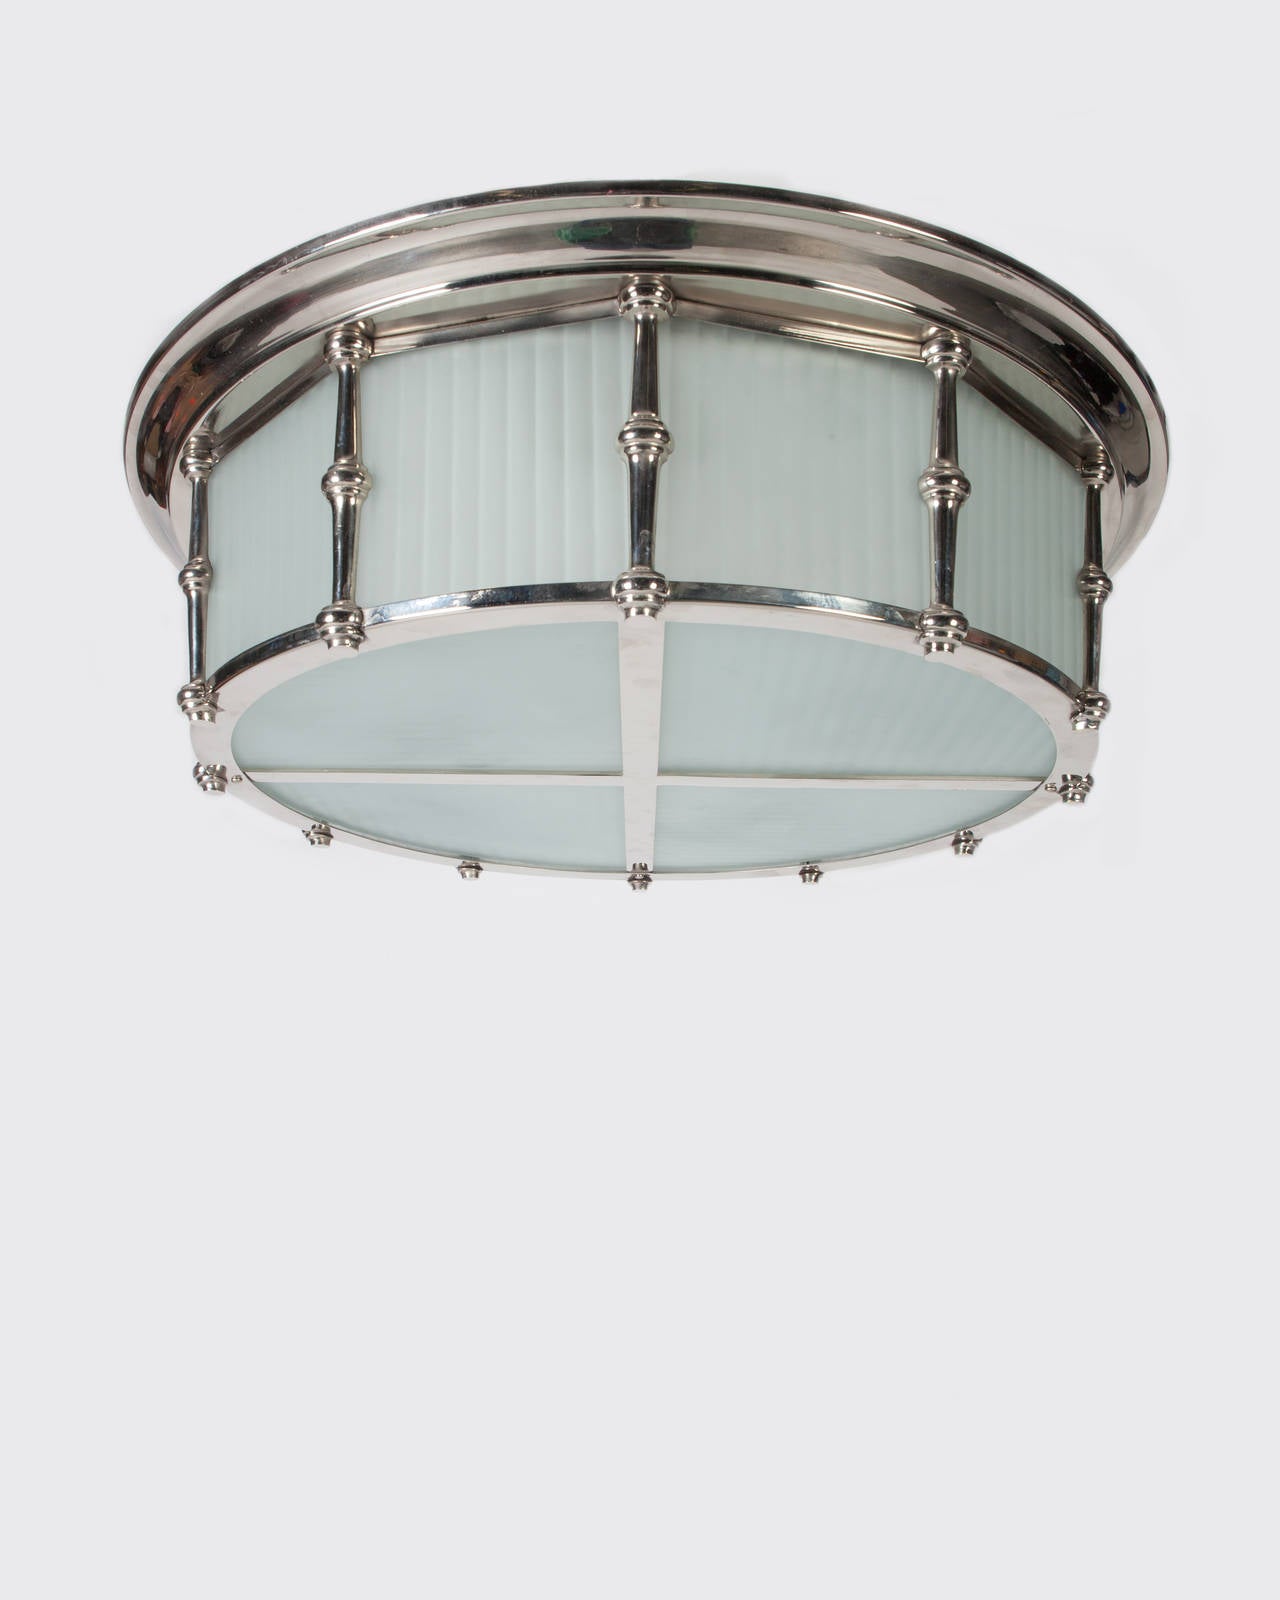 AHL3916.

circa 1930.
A large Art Deco period flush mounted fixture with frosted fluted glass panels in a nickel finish. Due to the antique nature of this fixture, there may be some nicks or imperfections in the glass as well as variations from